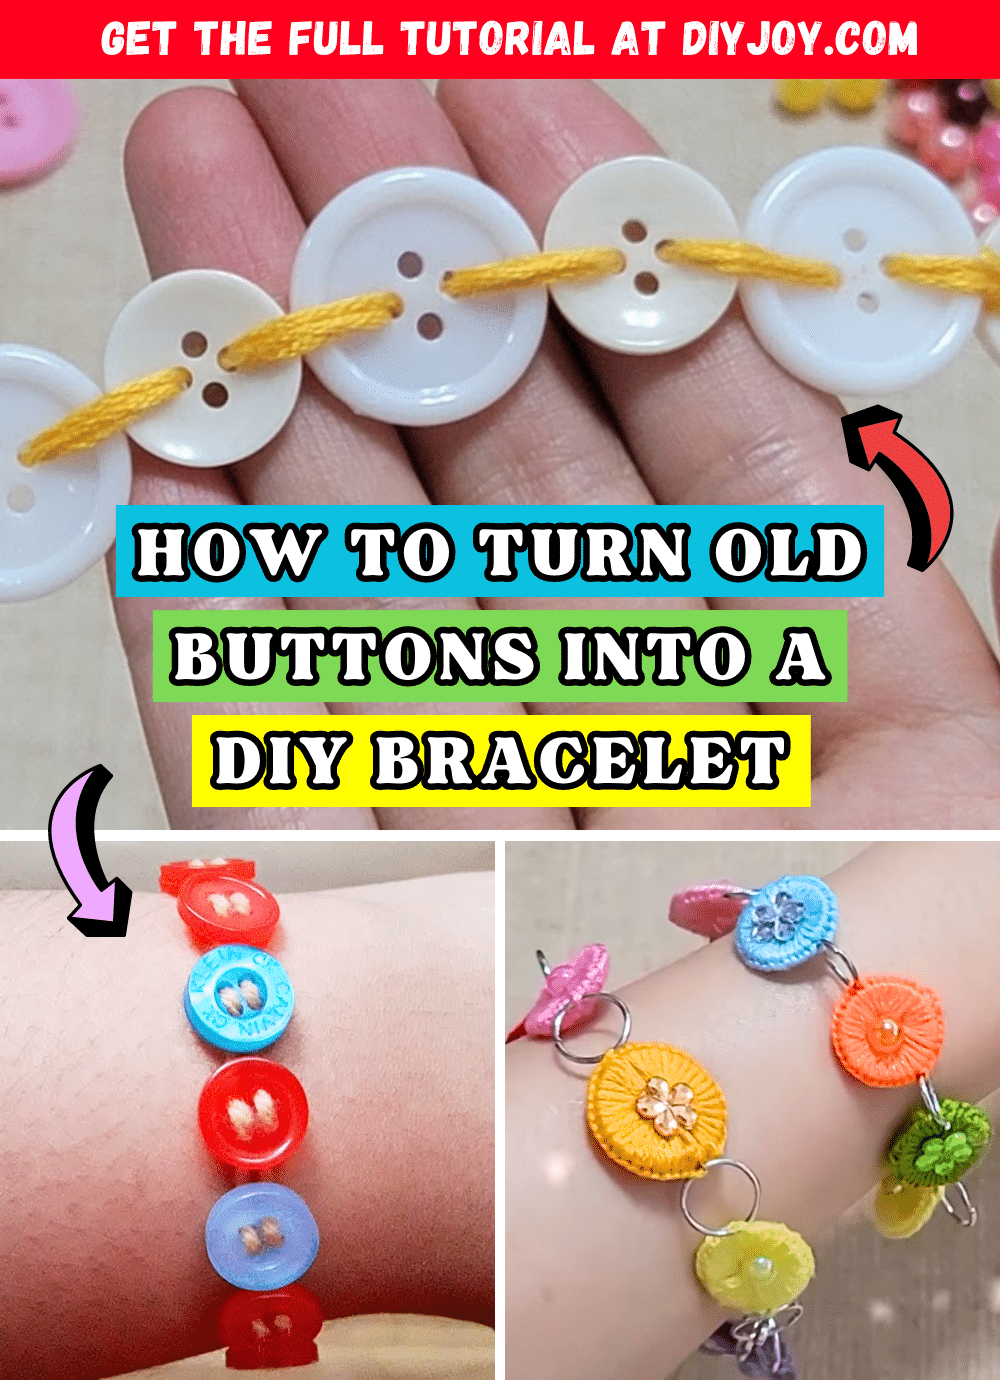 How to Turn Old Buttons Into a DIY Bracelet